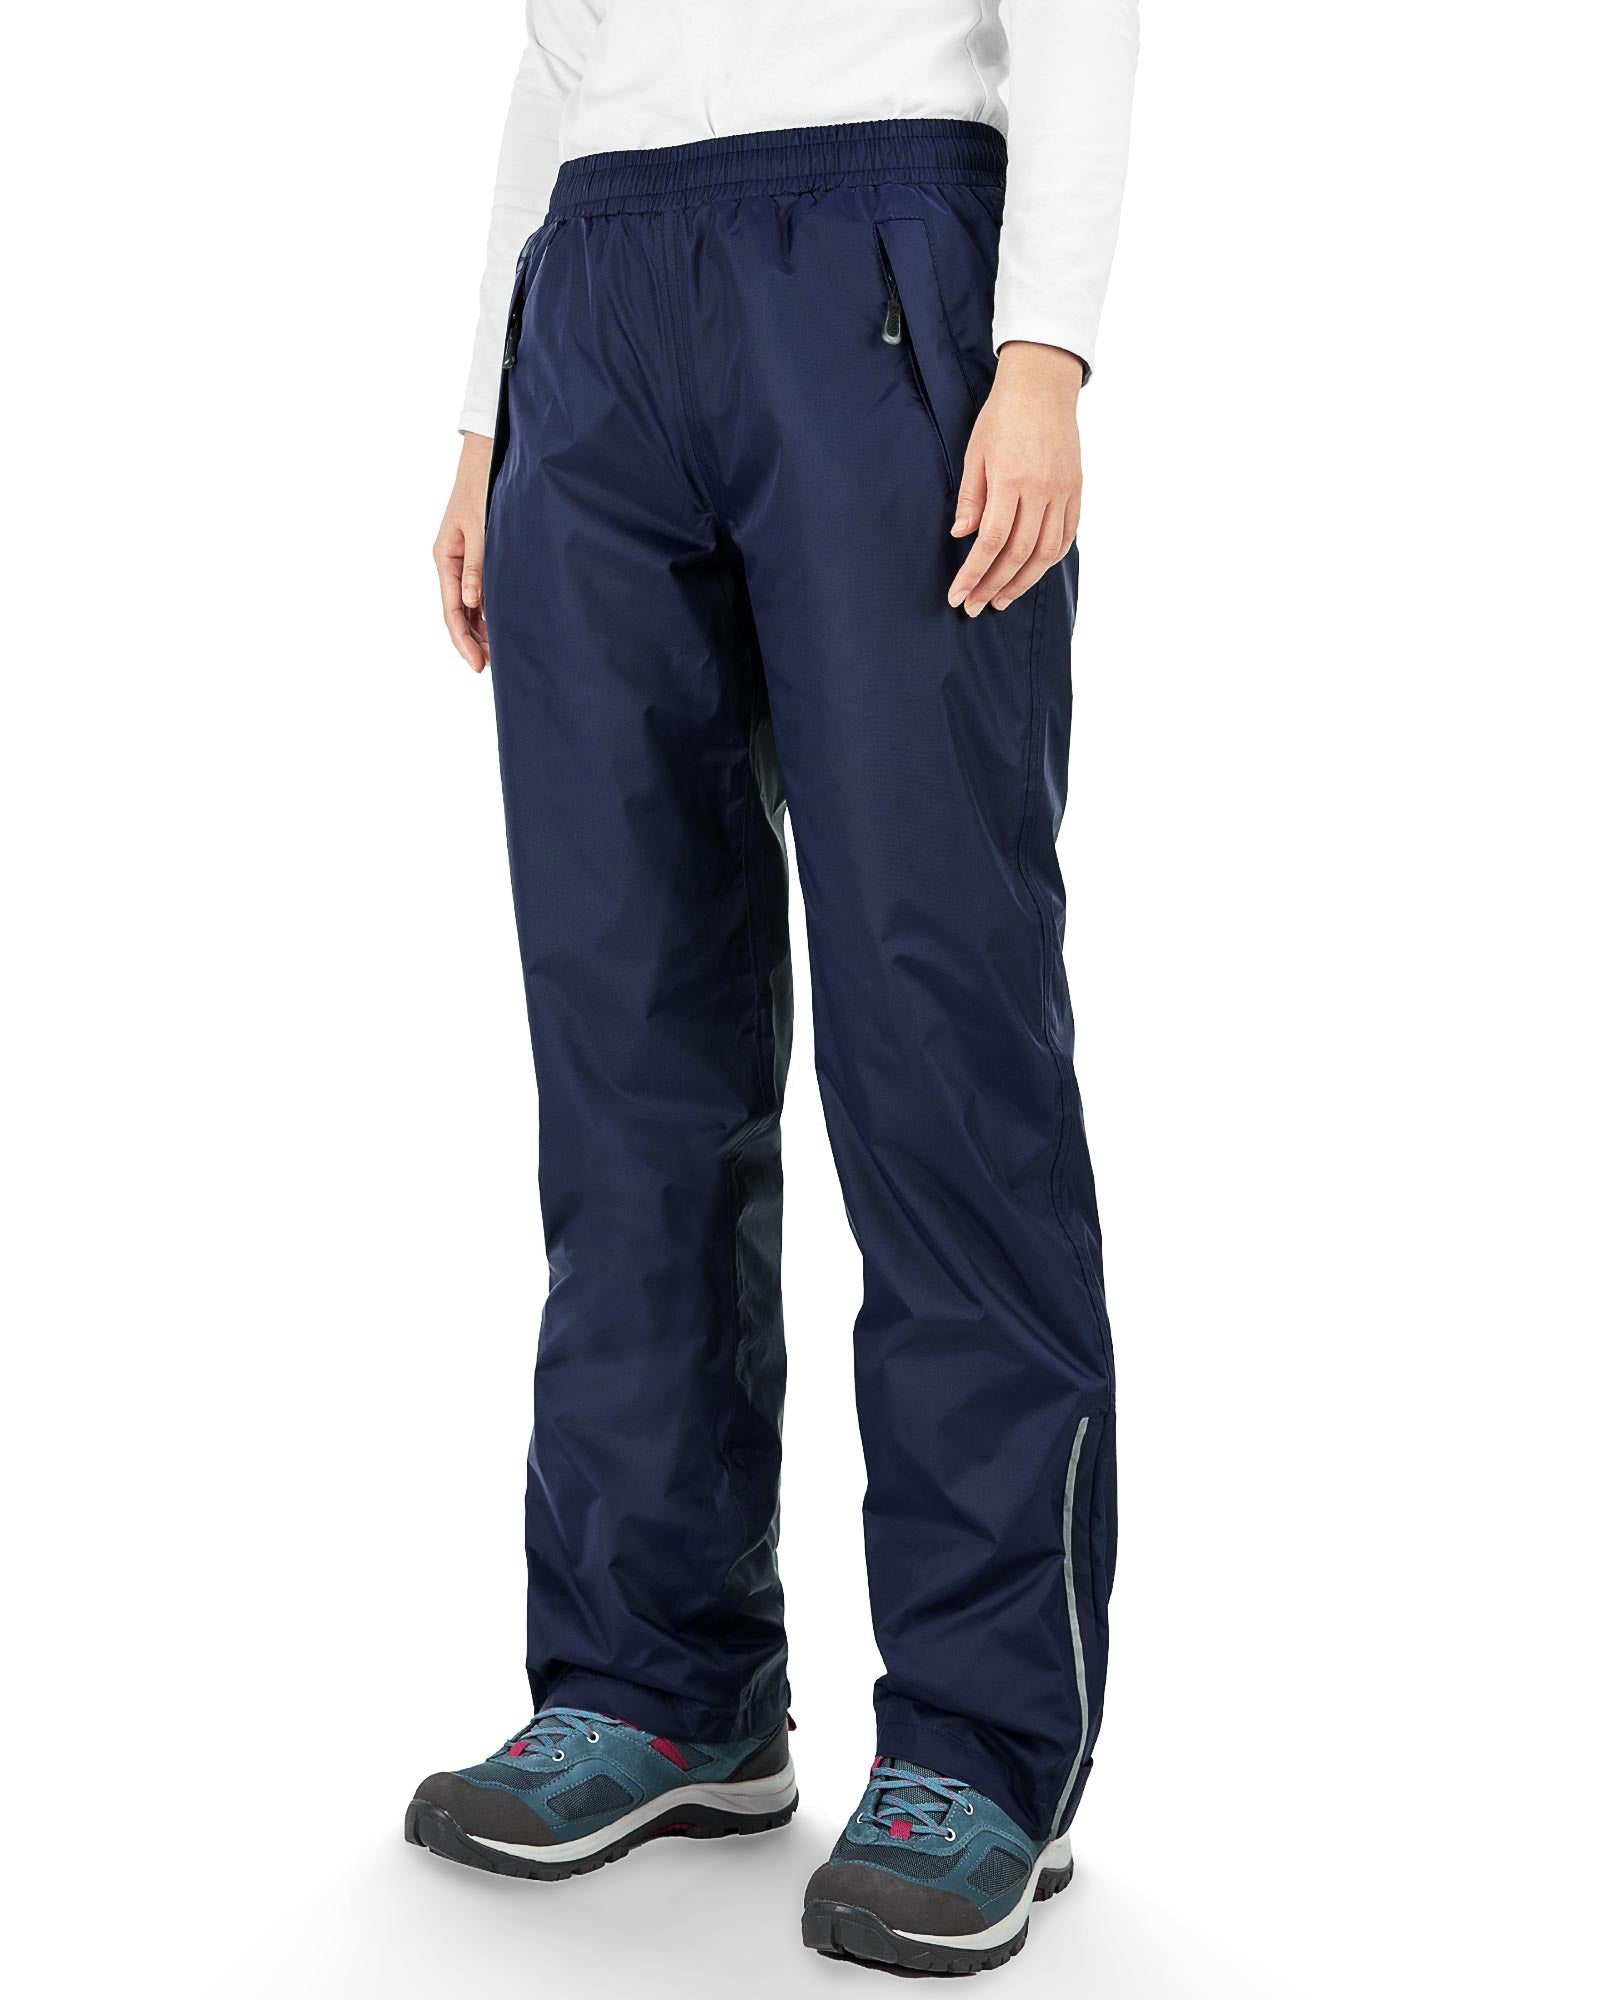 Track Pants with Piping - Dark blue/color-block - Ladies